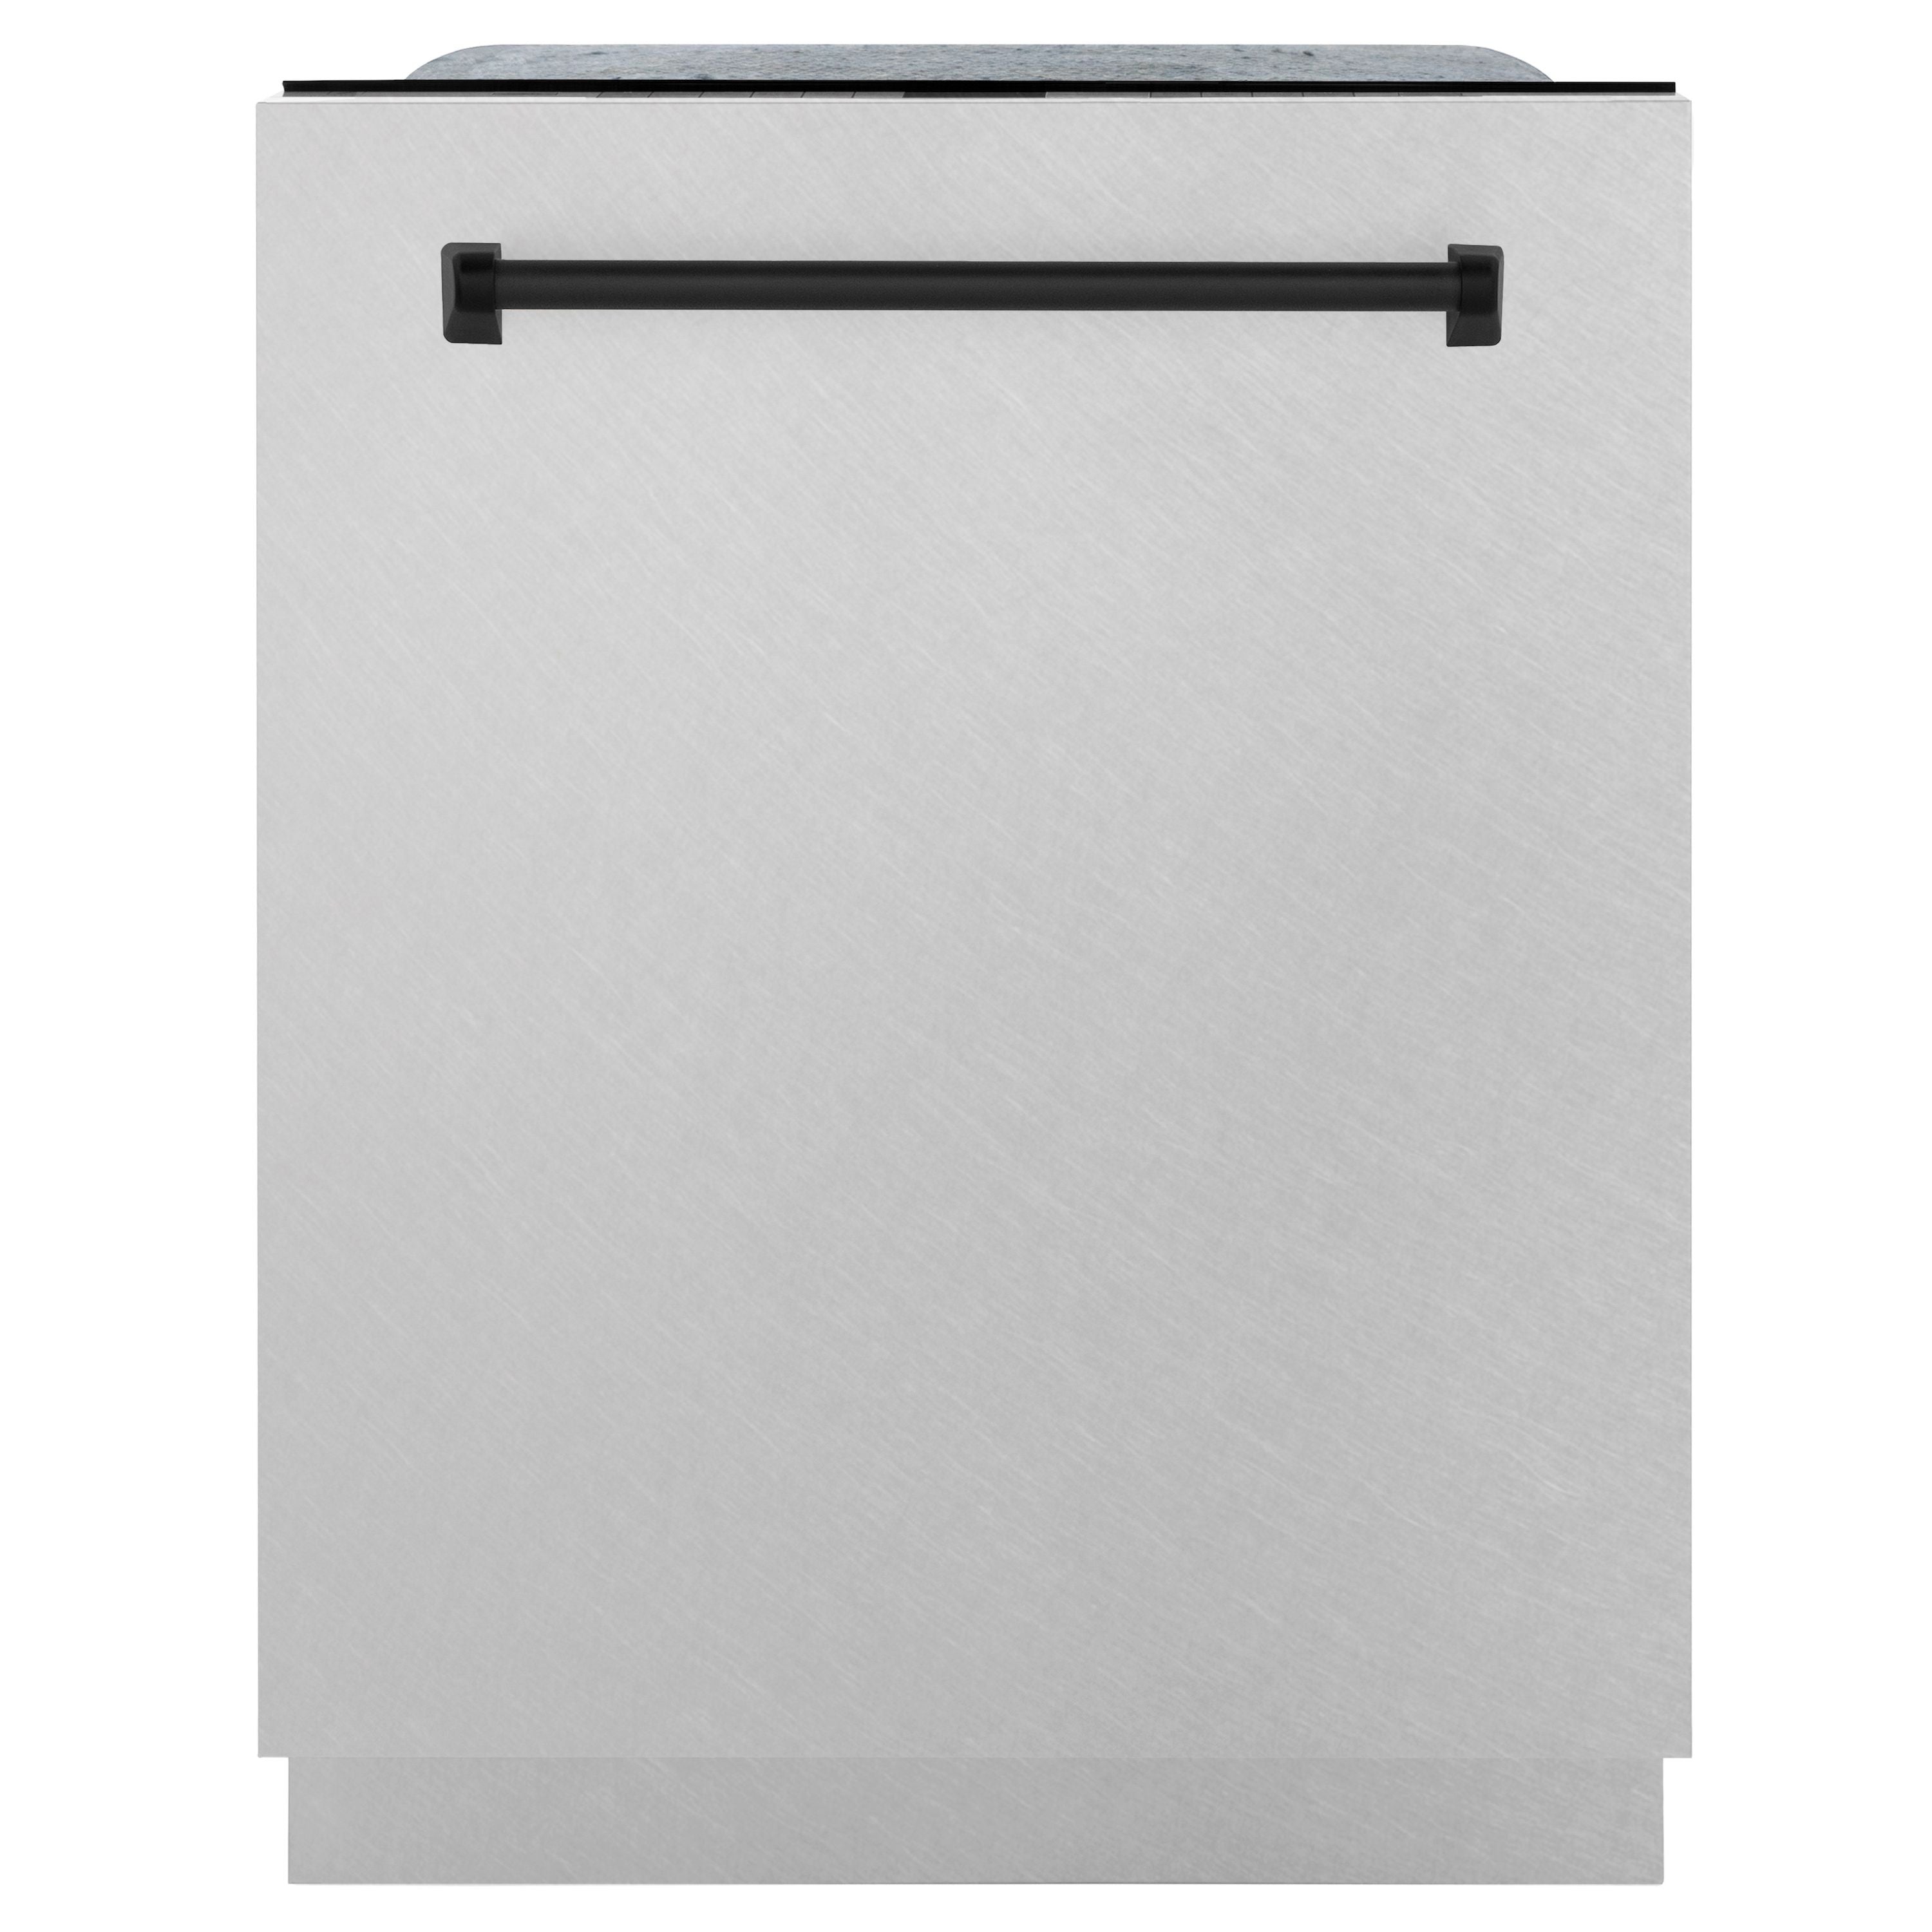 ZLINE Autograph Edition 24 in. Tall Dishwasher, Touch Control in DuraSnow® Stainless Steel with Matte Black Handle